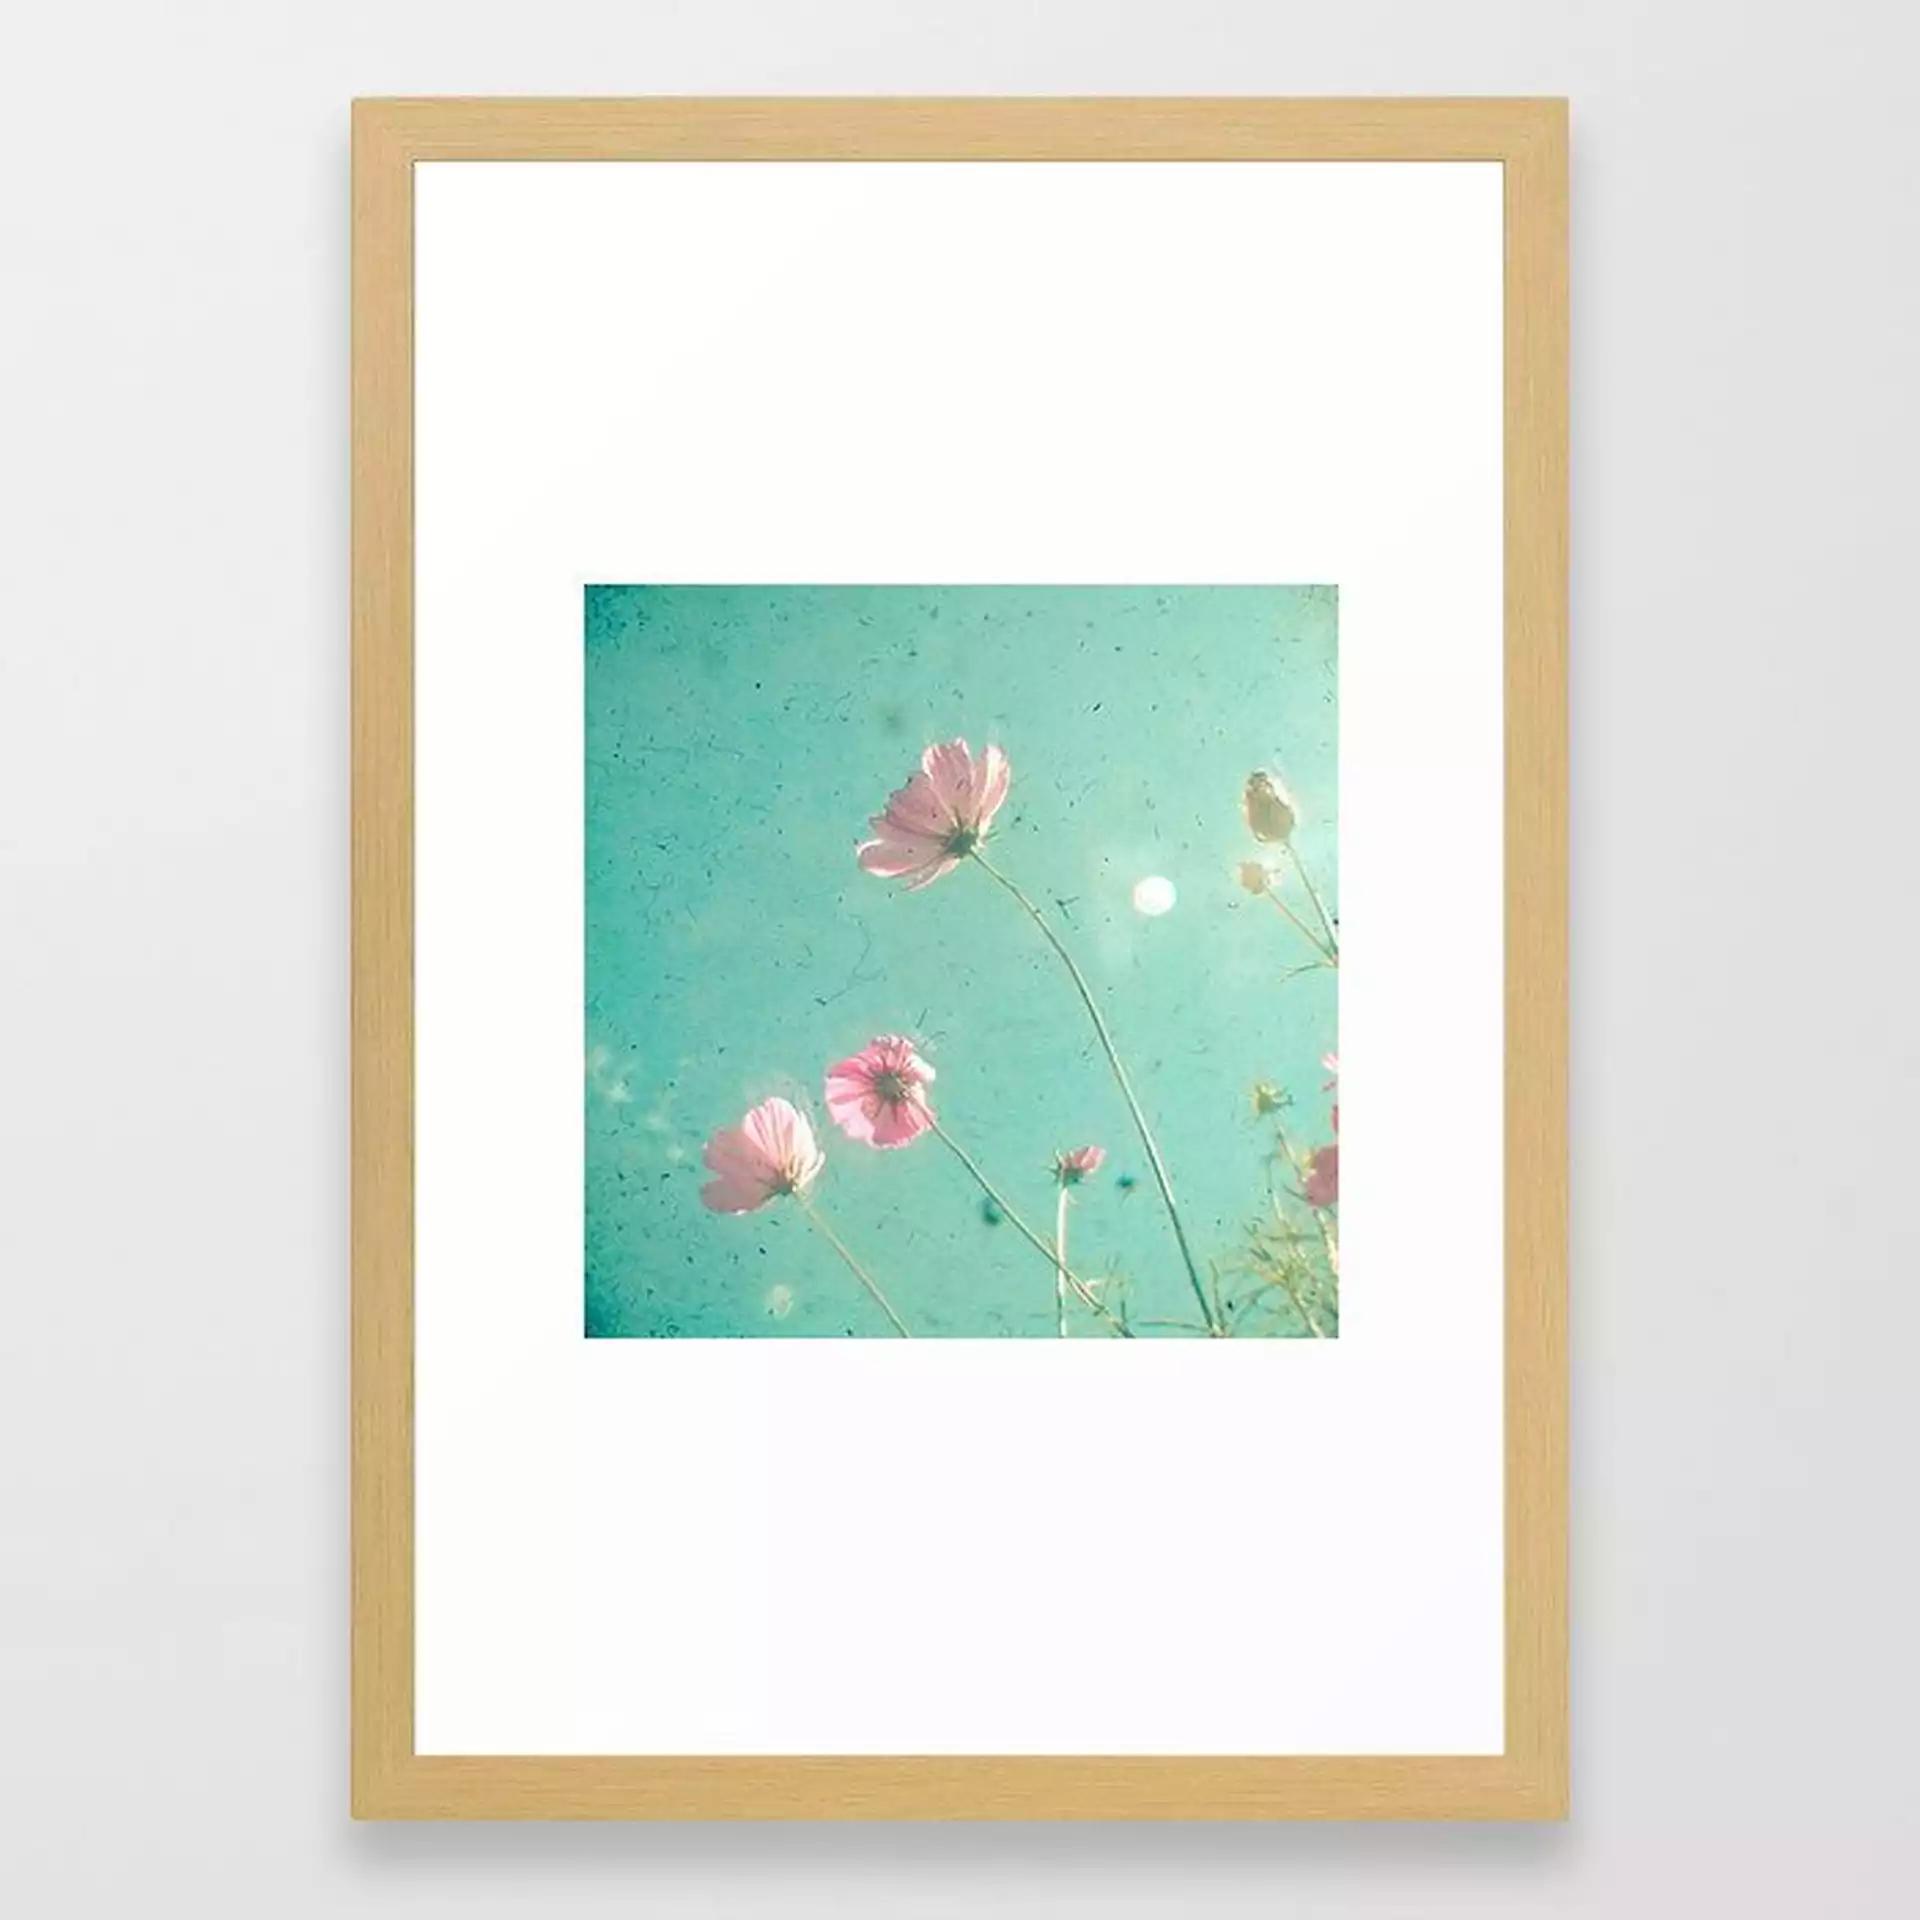 Meadow Framed Art Print by Cassia Beck - Conservation Natural - SMALL-15x21